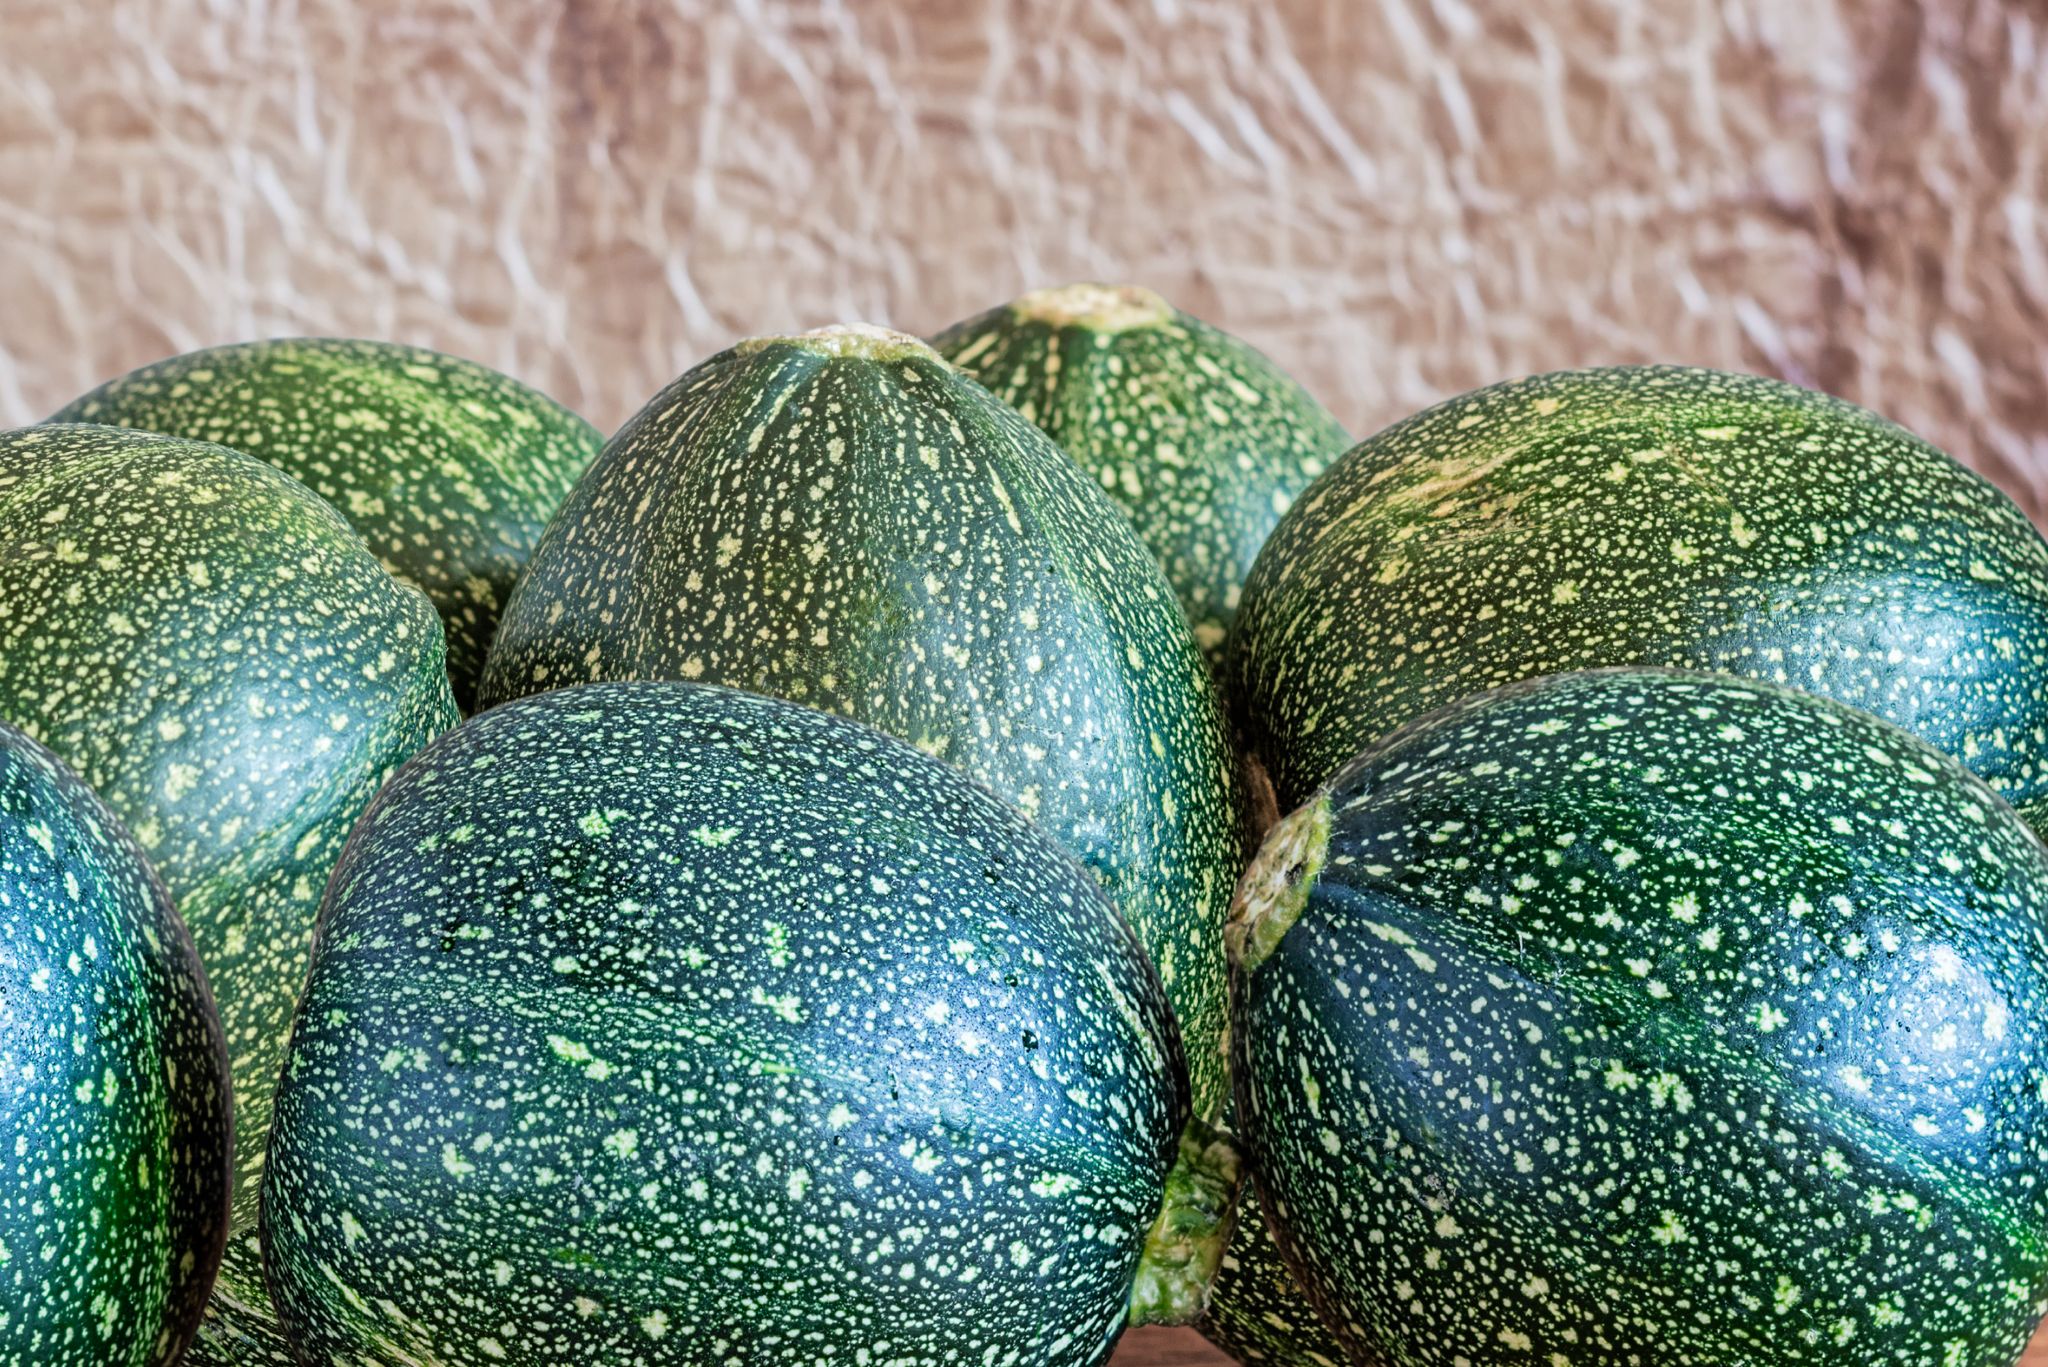 Harvested green eight ball squash